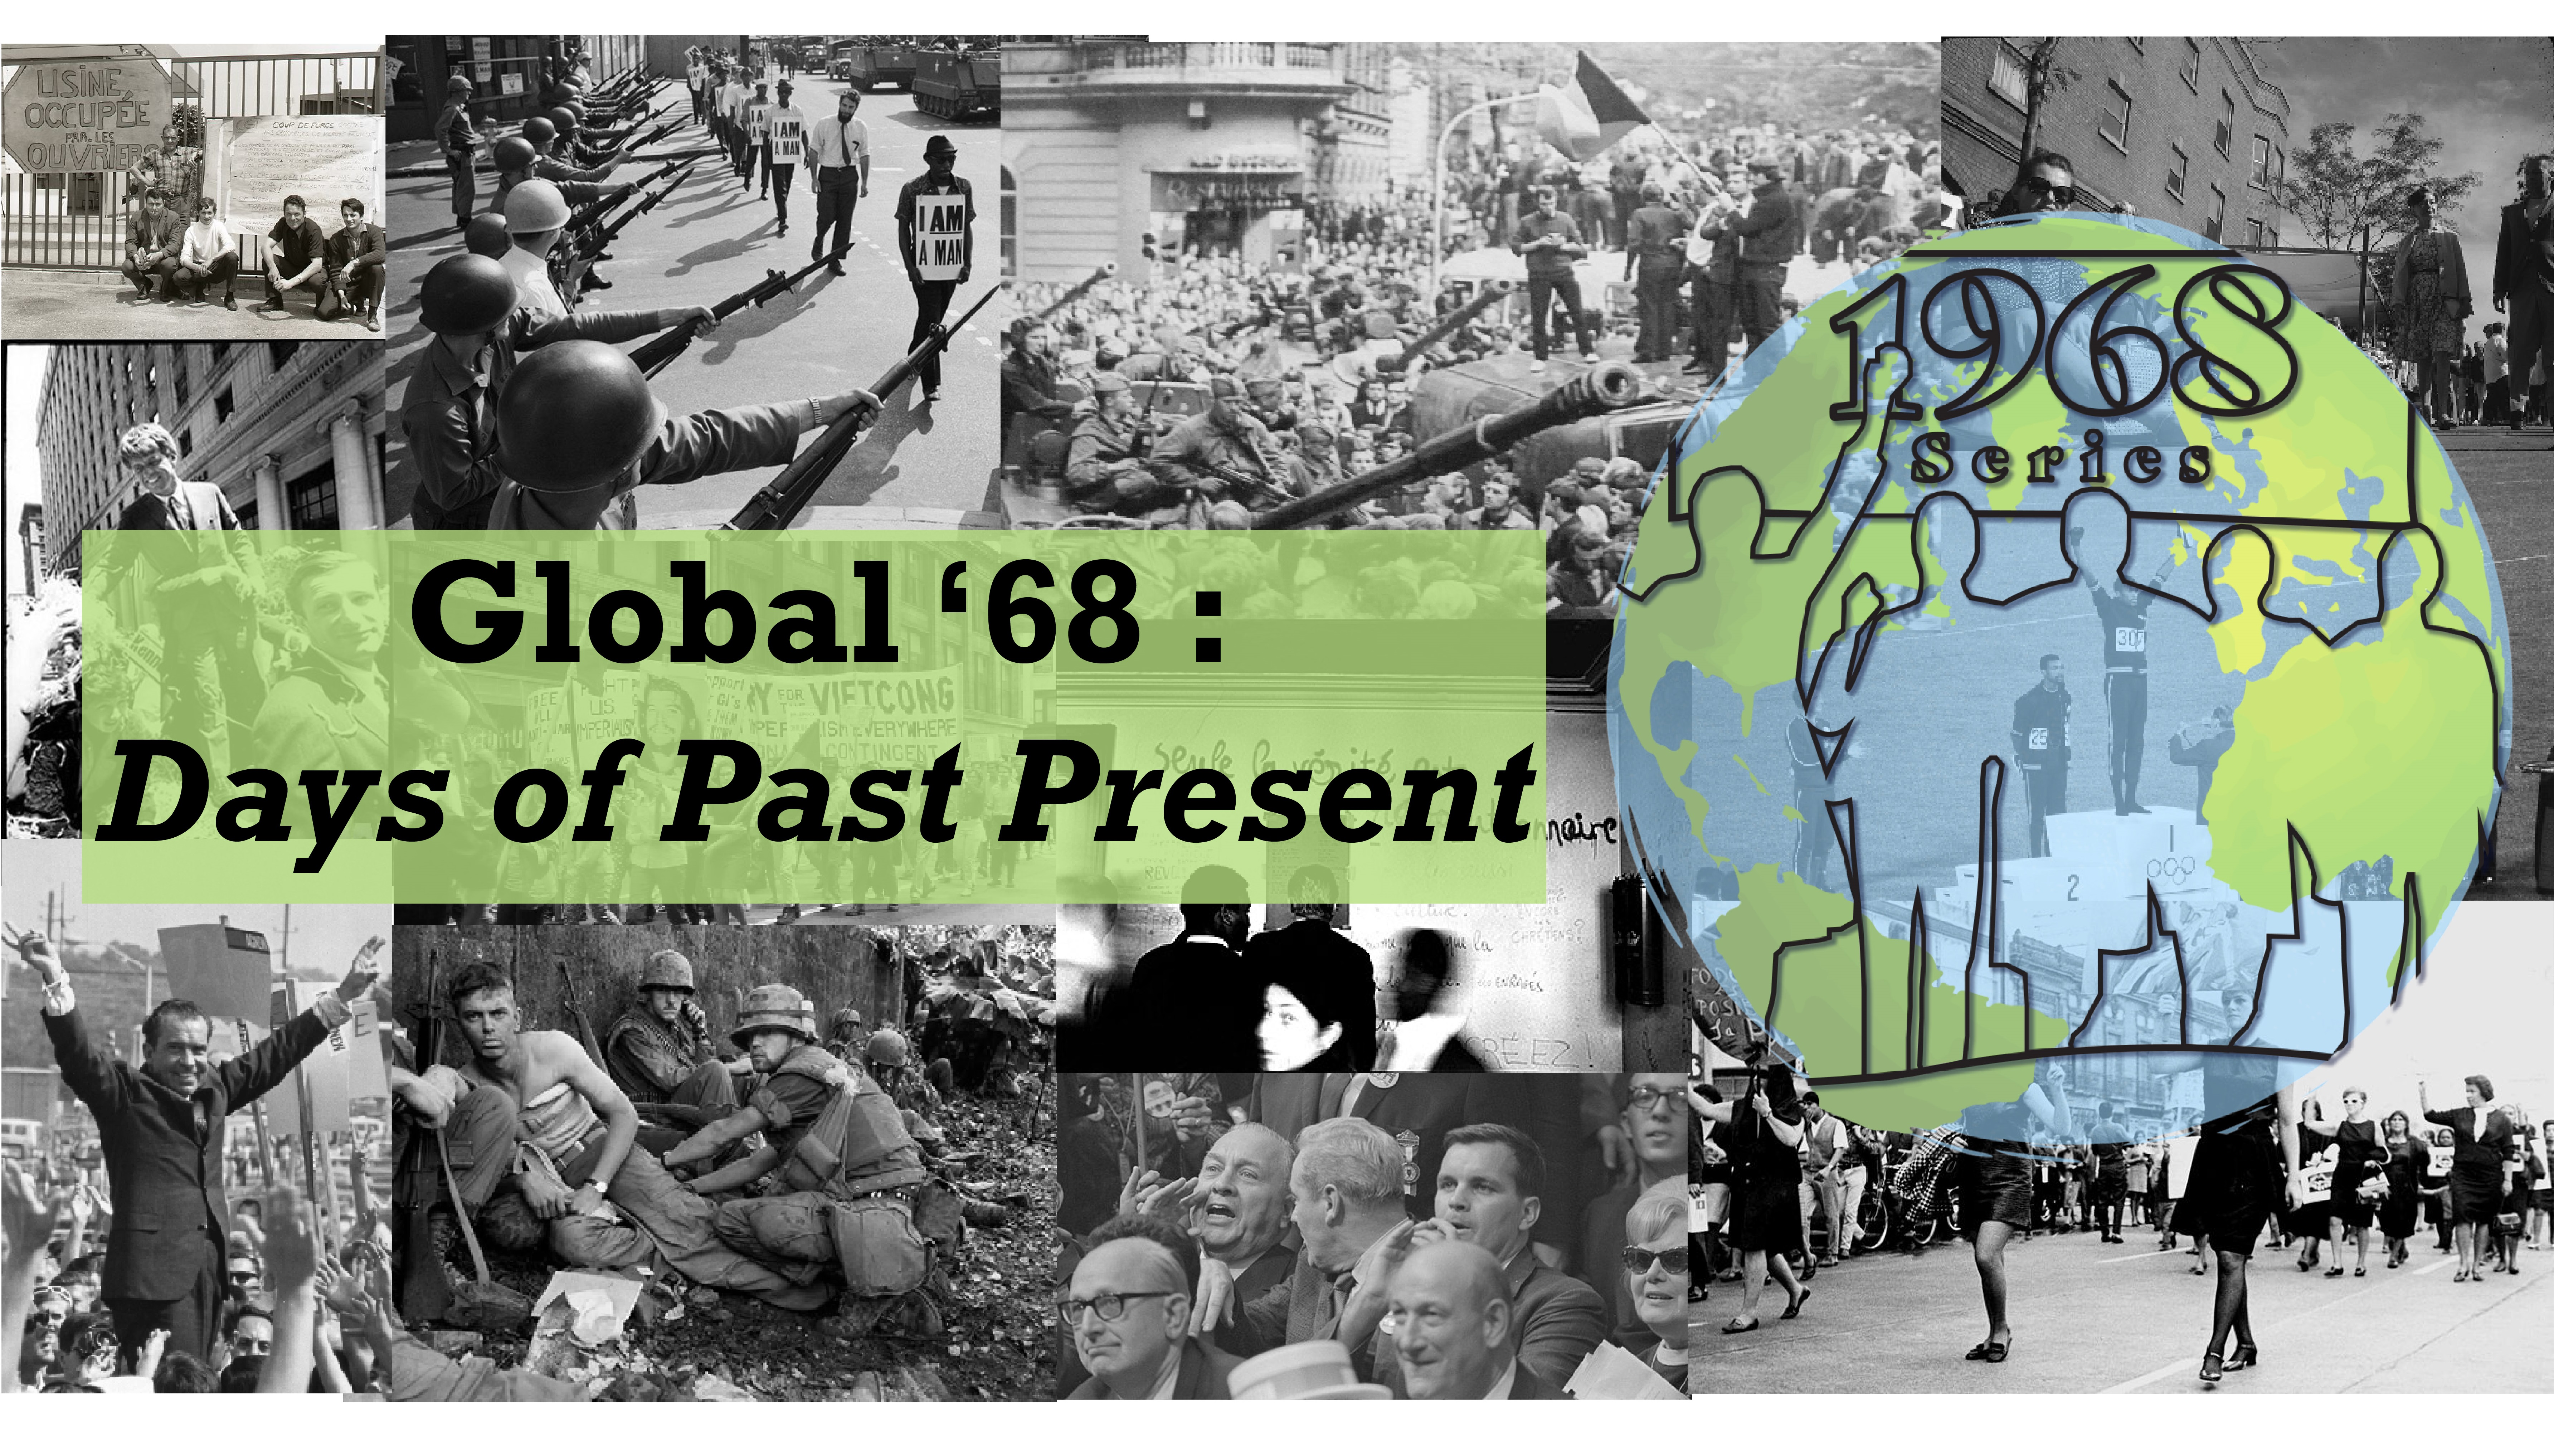 The Global 1968 Symposium: Days of Past Present